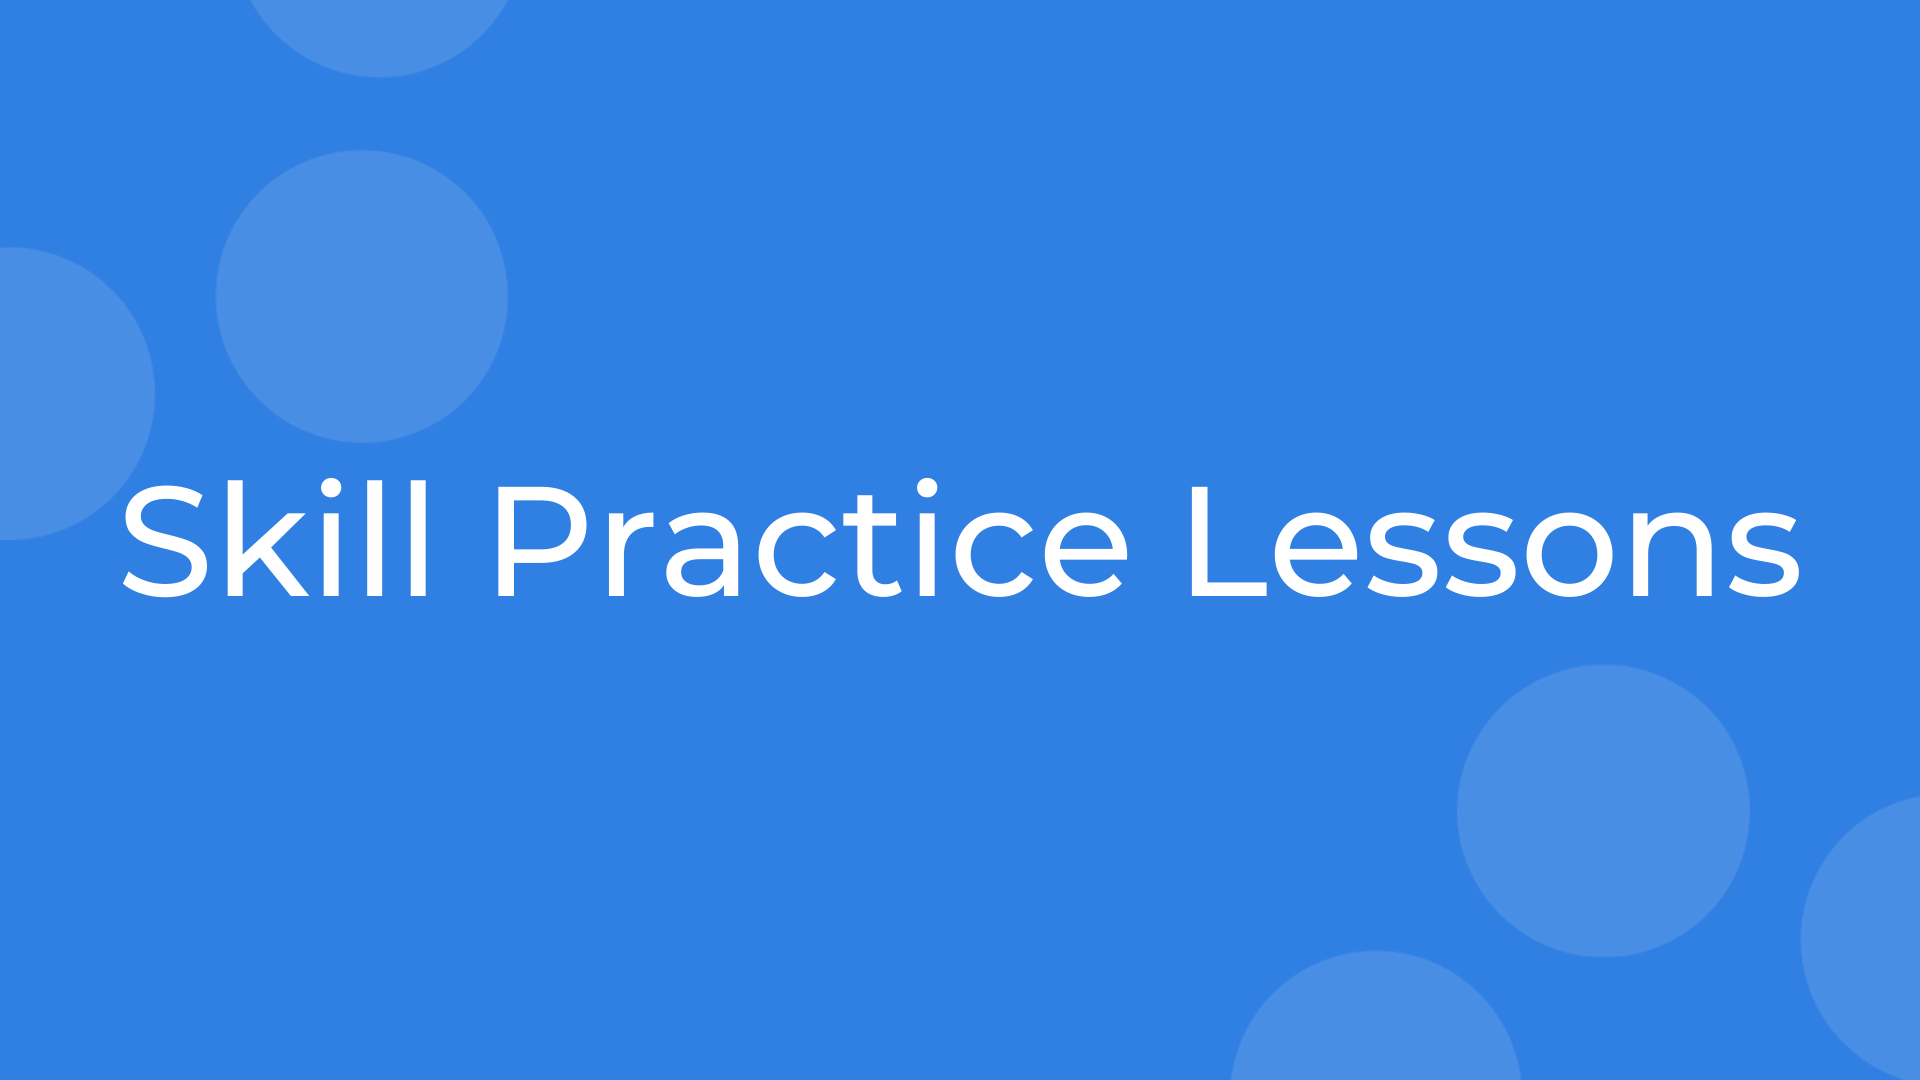 Skill Practice Lessons